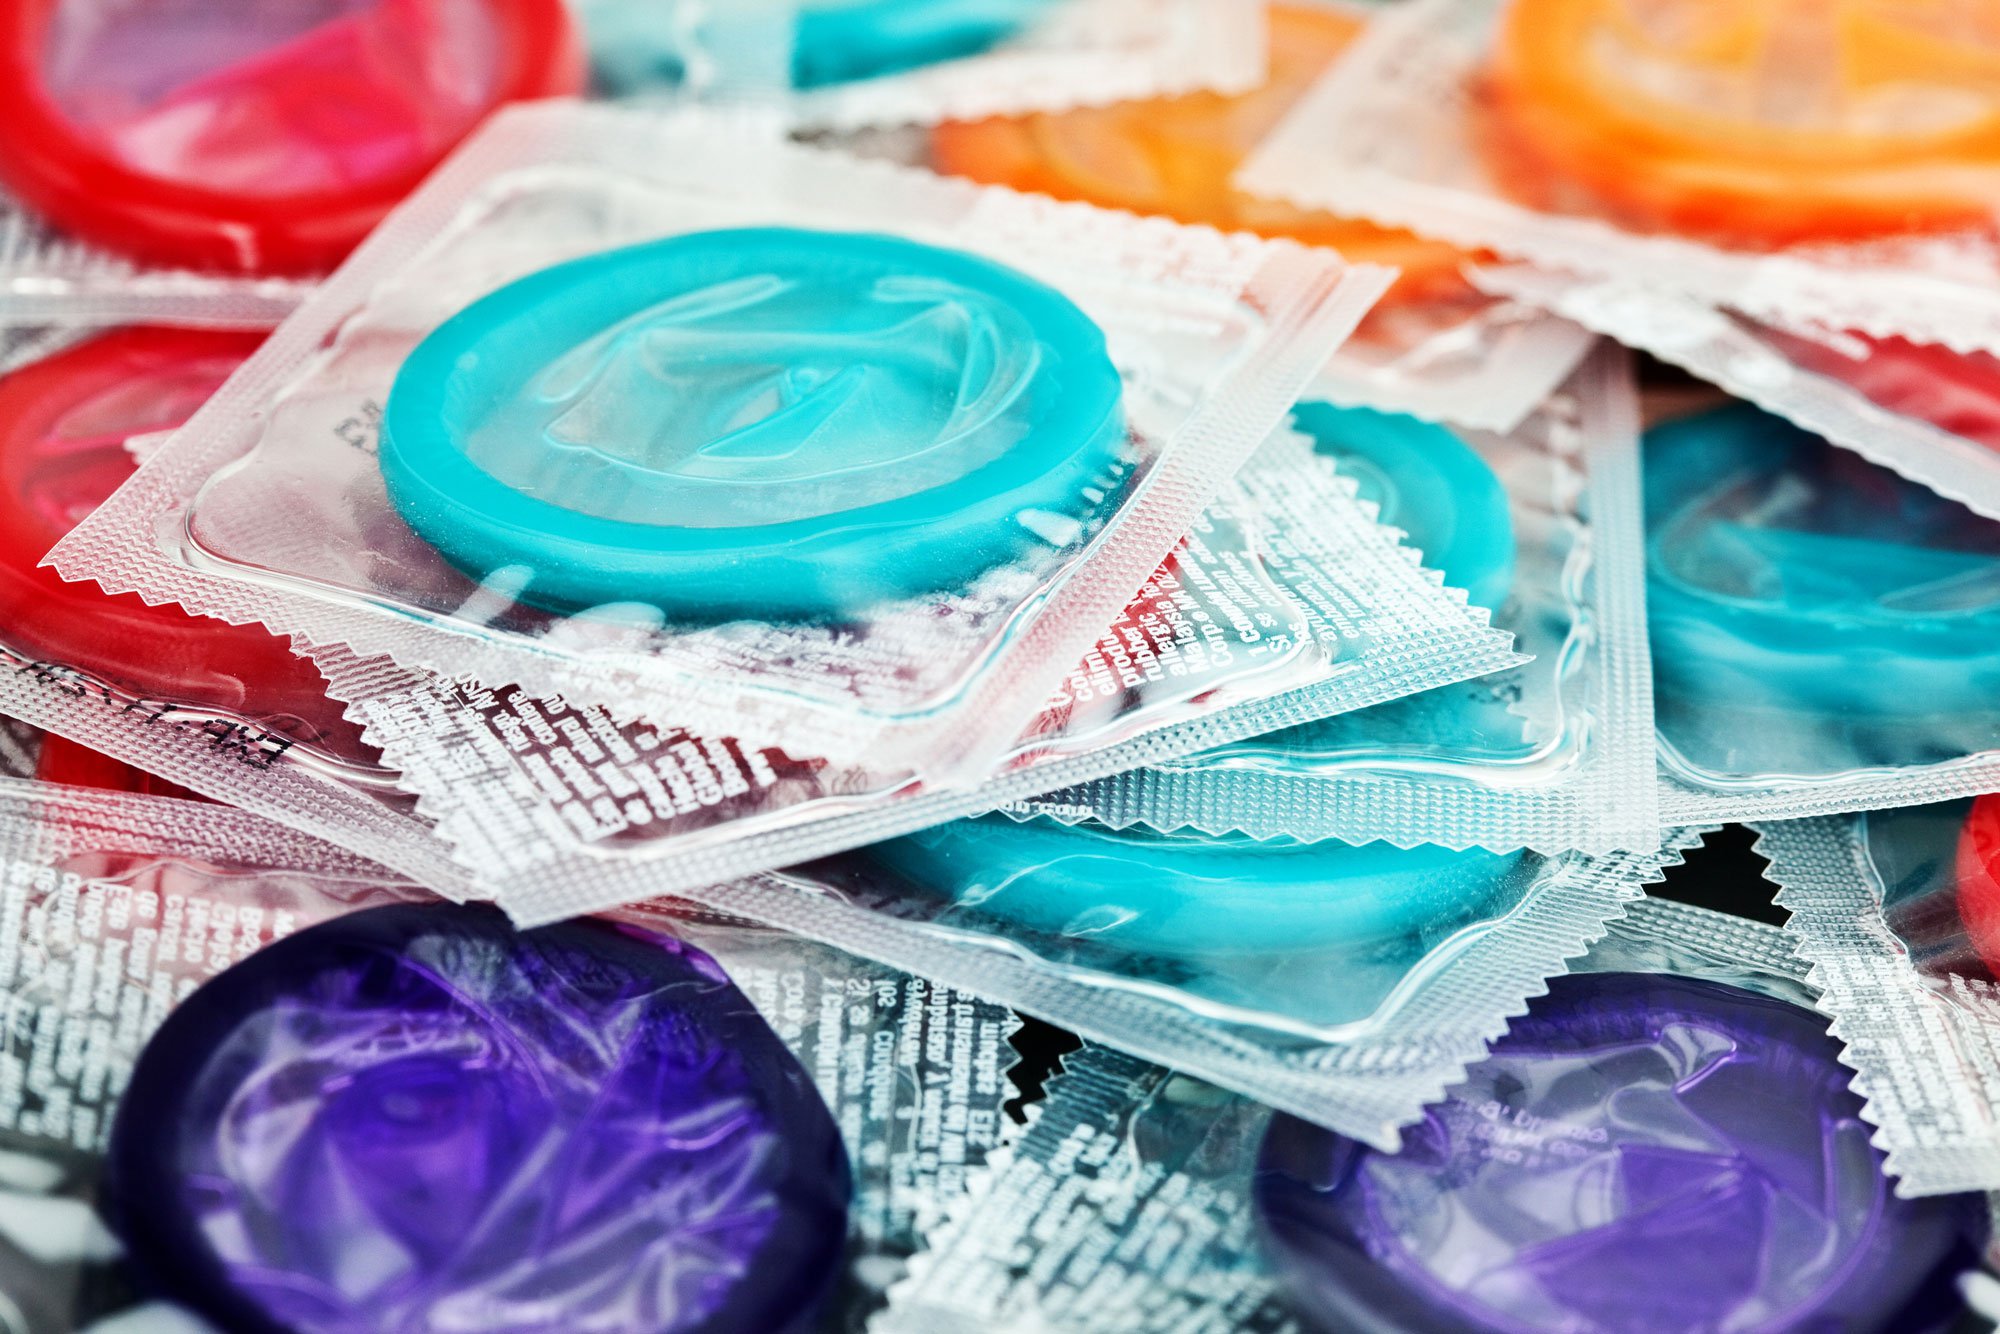 Everything you always wanted to know about condoms One Medical